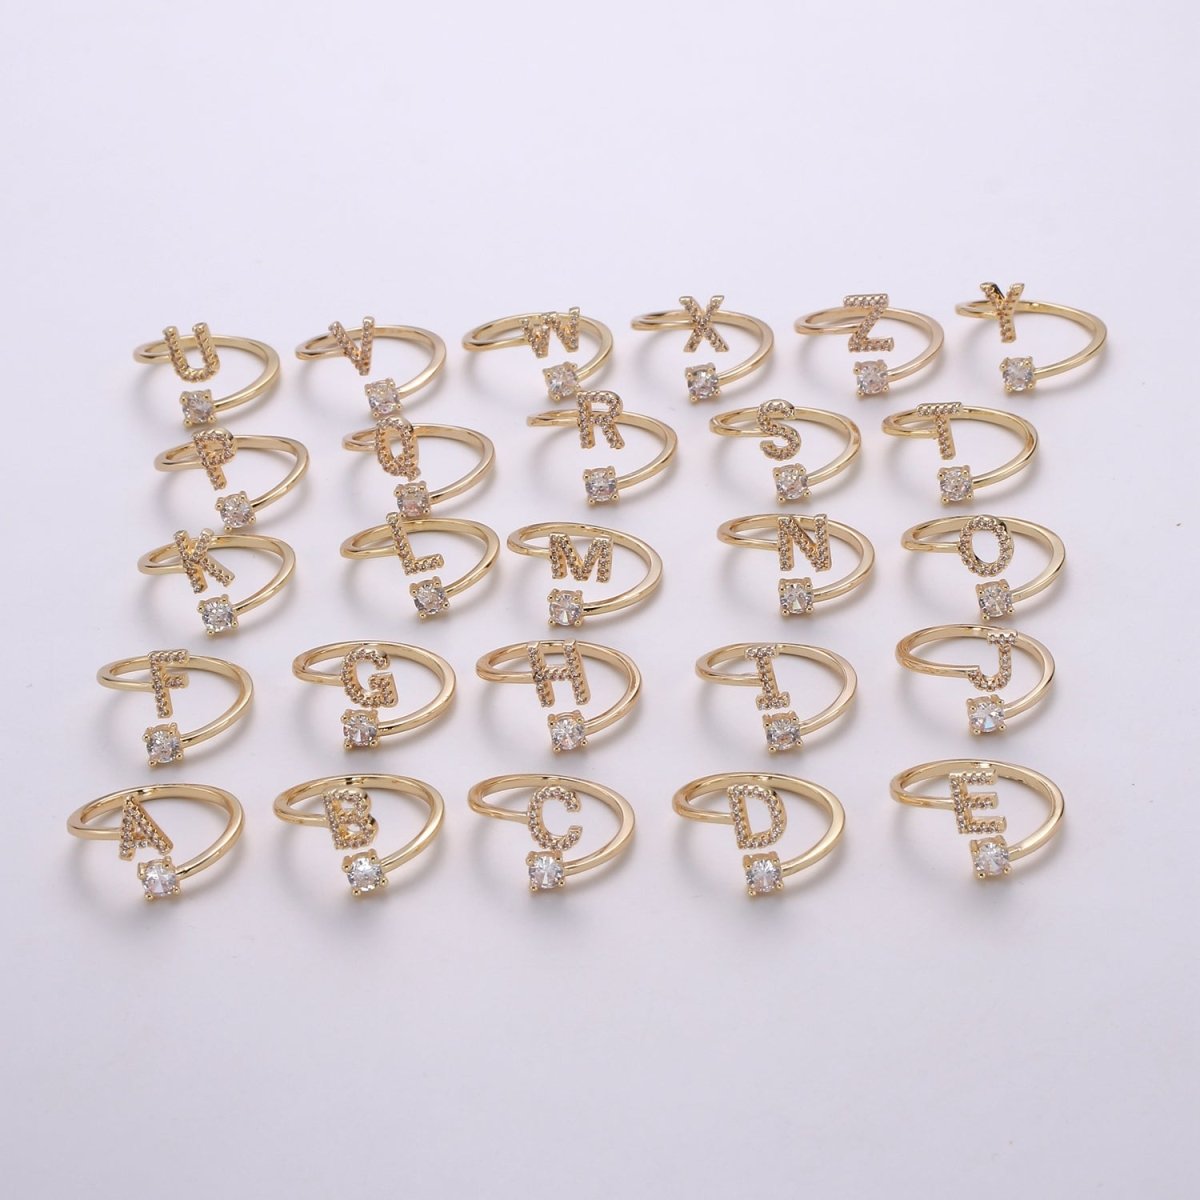 Gold Initial Letter Rings For Women Girls ,Open Letter Ring , Stackable  Alphabet Ring,Jewelry Gifts For For Mum Her Wife Girlfriend - Walmart.com